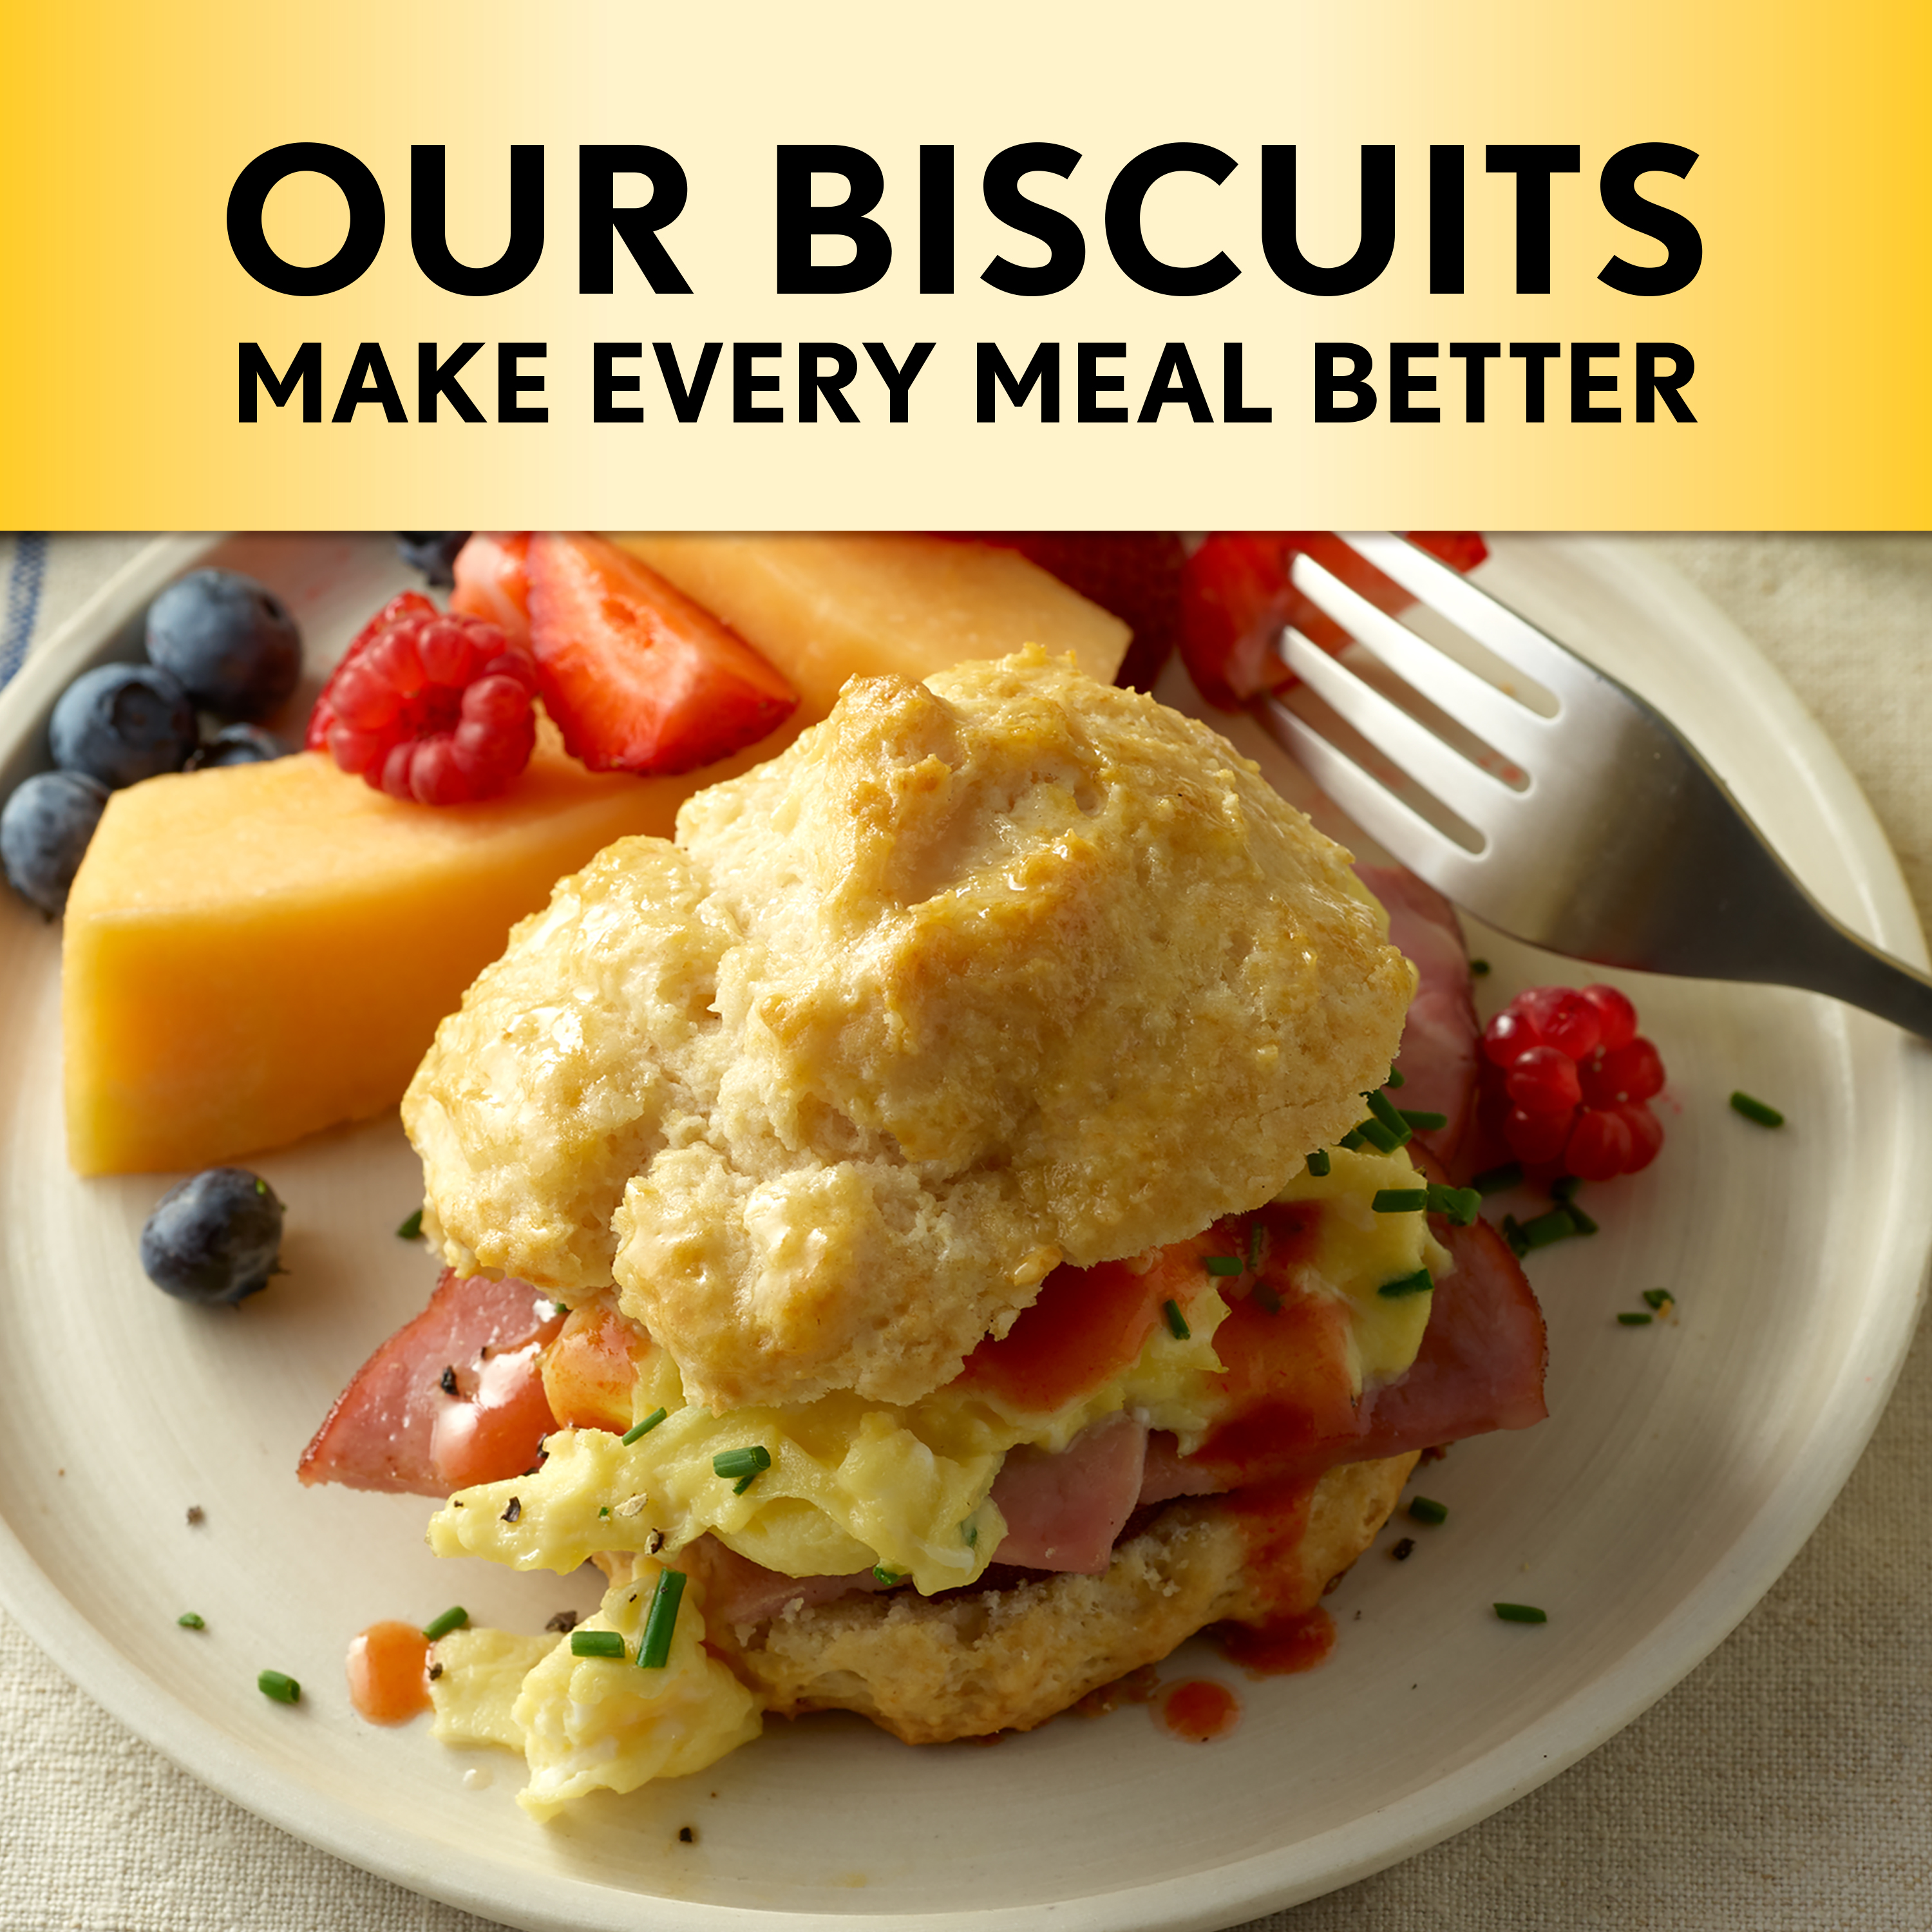 Red Lobster Honey Butter Frozen Biscuits, Ready to Bake, Makes 8 Regular Biscuits, 15.69 oz - image 6 of 7